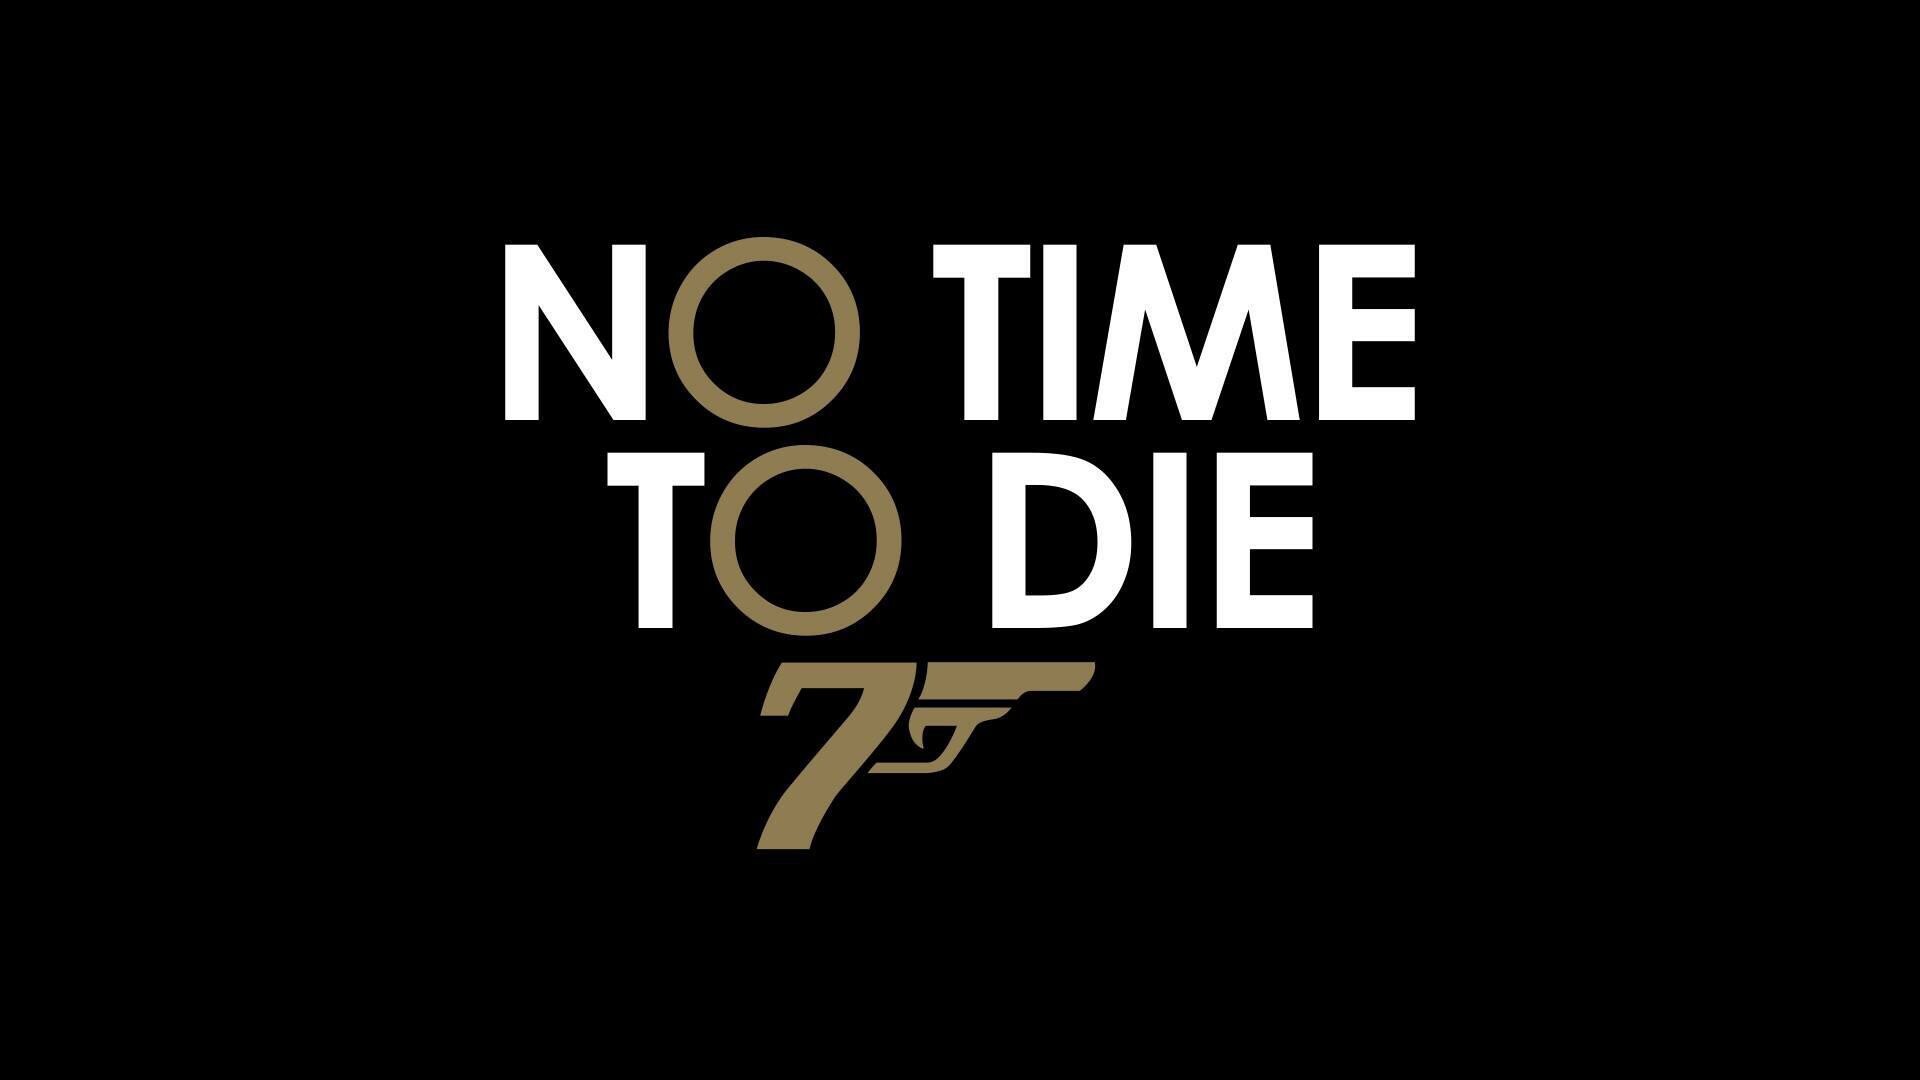 No Time to Die: An epic, explosive and emotional farewell to the longest-serving 007, Poster. 1920x1080 Full HD Background.